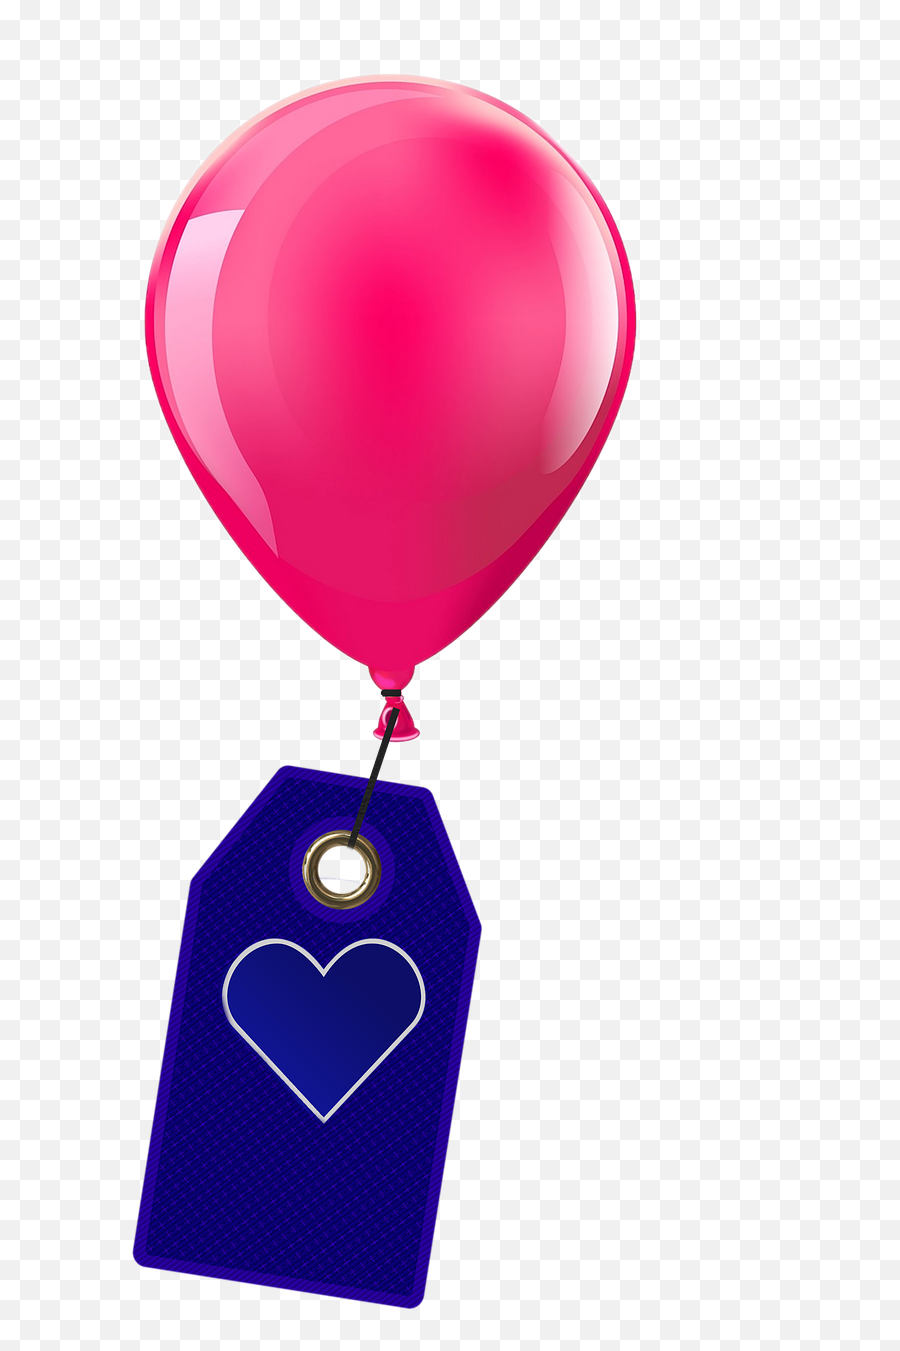 Balloon Sign Heart - Free Image On Pixabay Emoji,Hearts Background Png